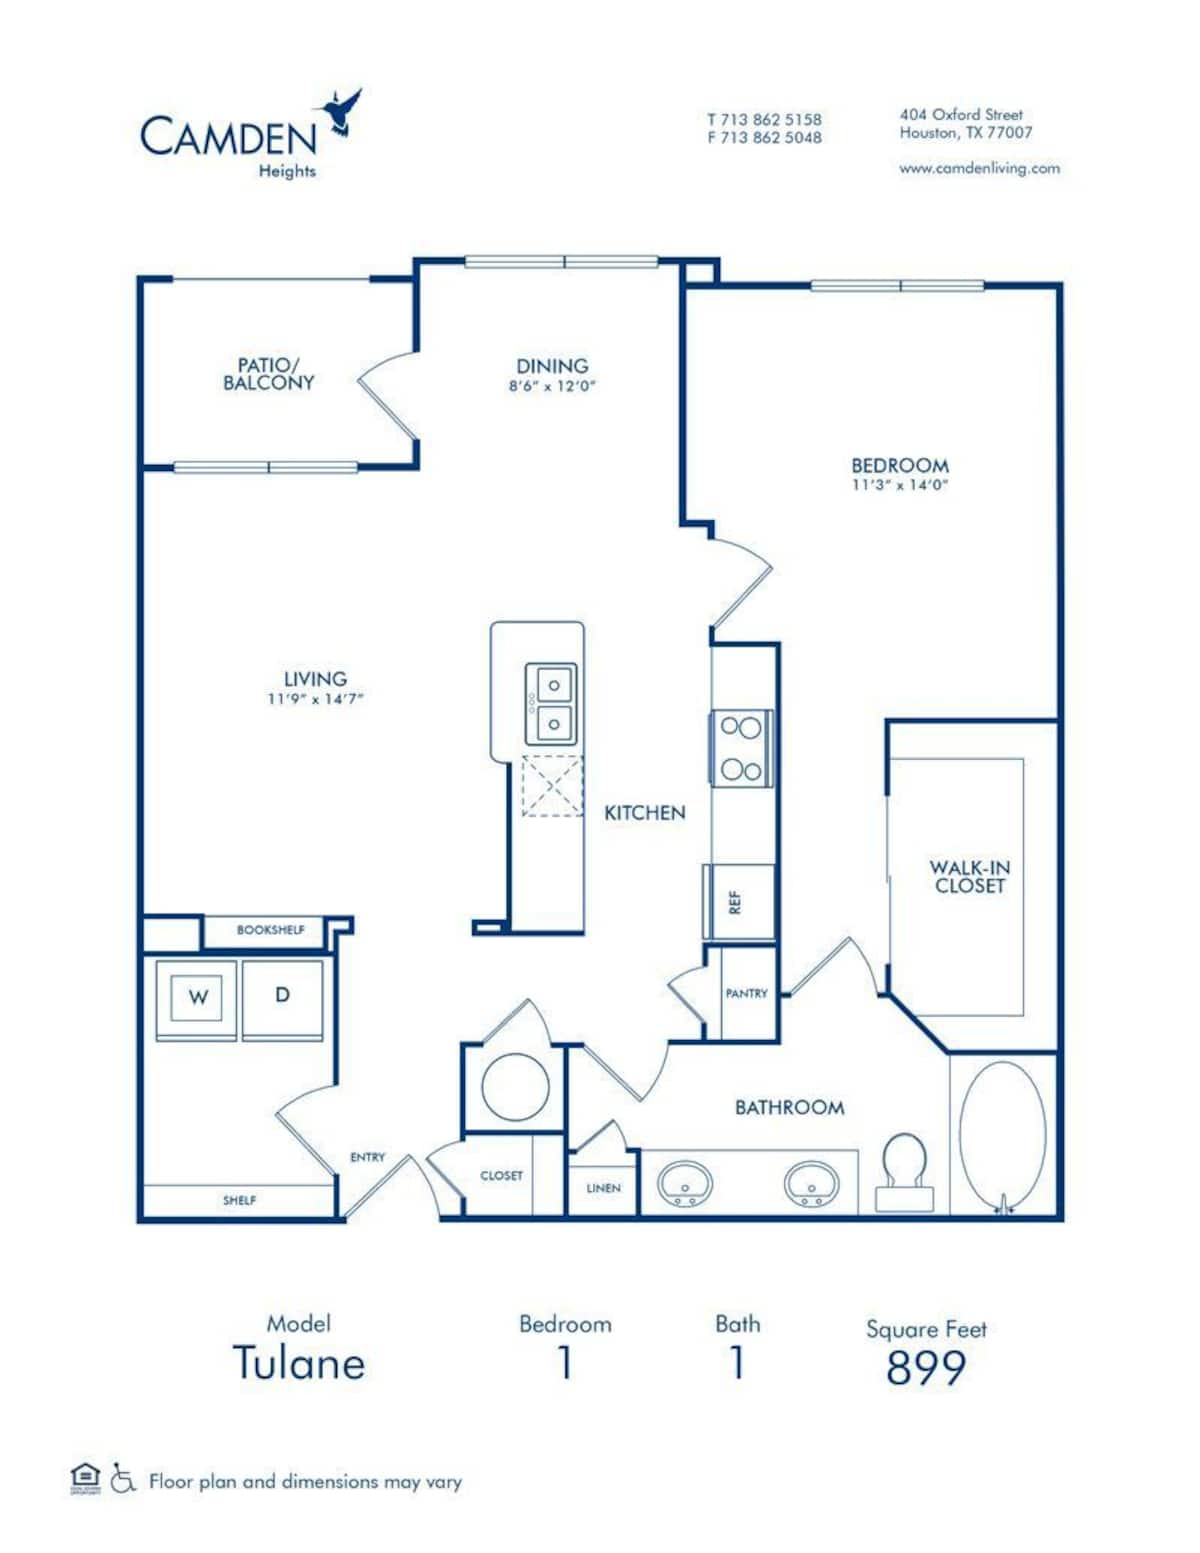 Floorplan diagram for The Tulane, showing 1 bedroom